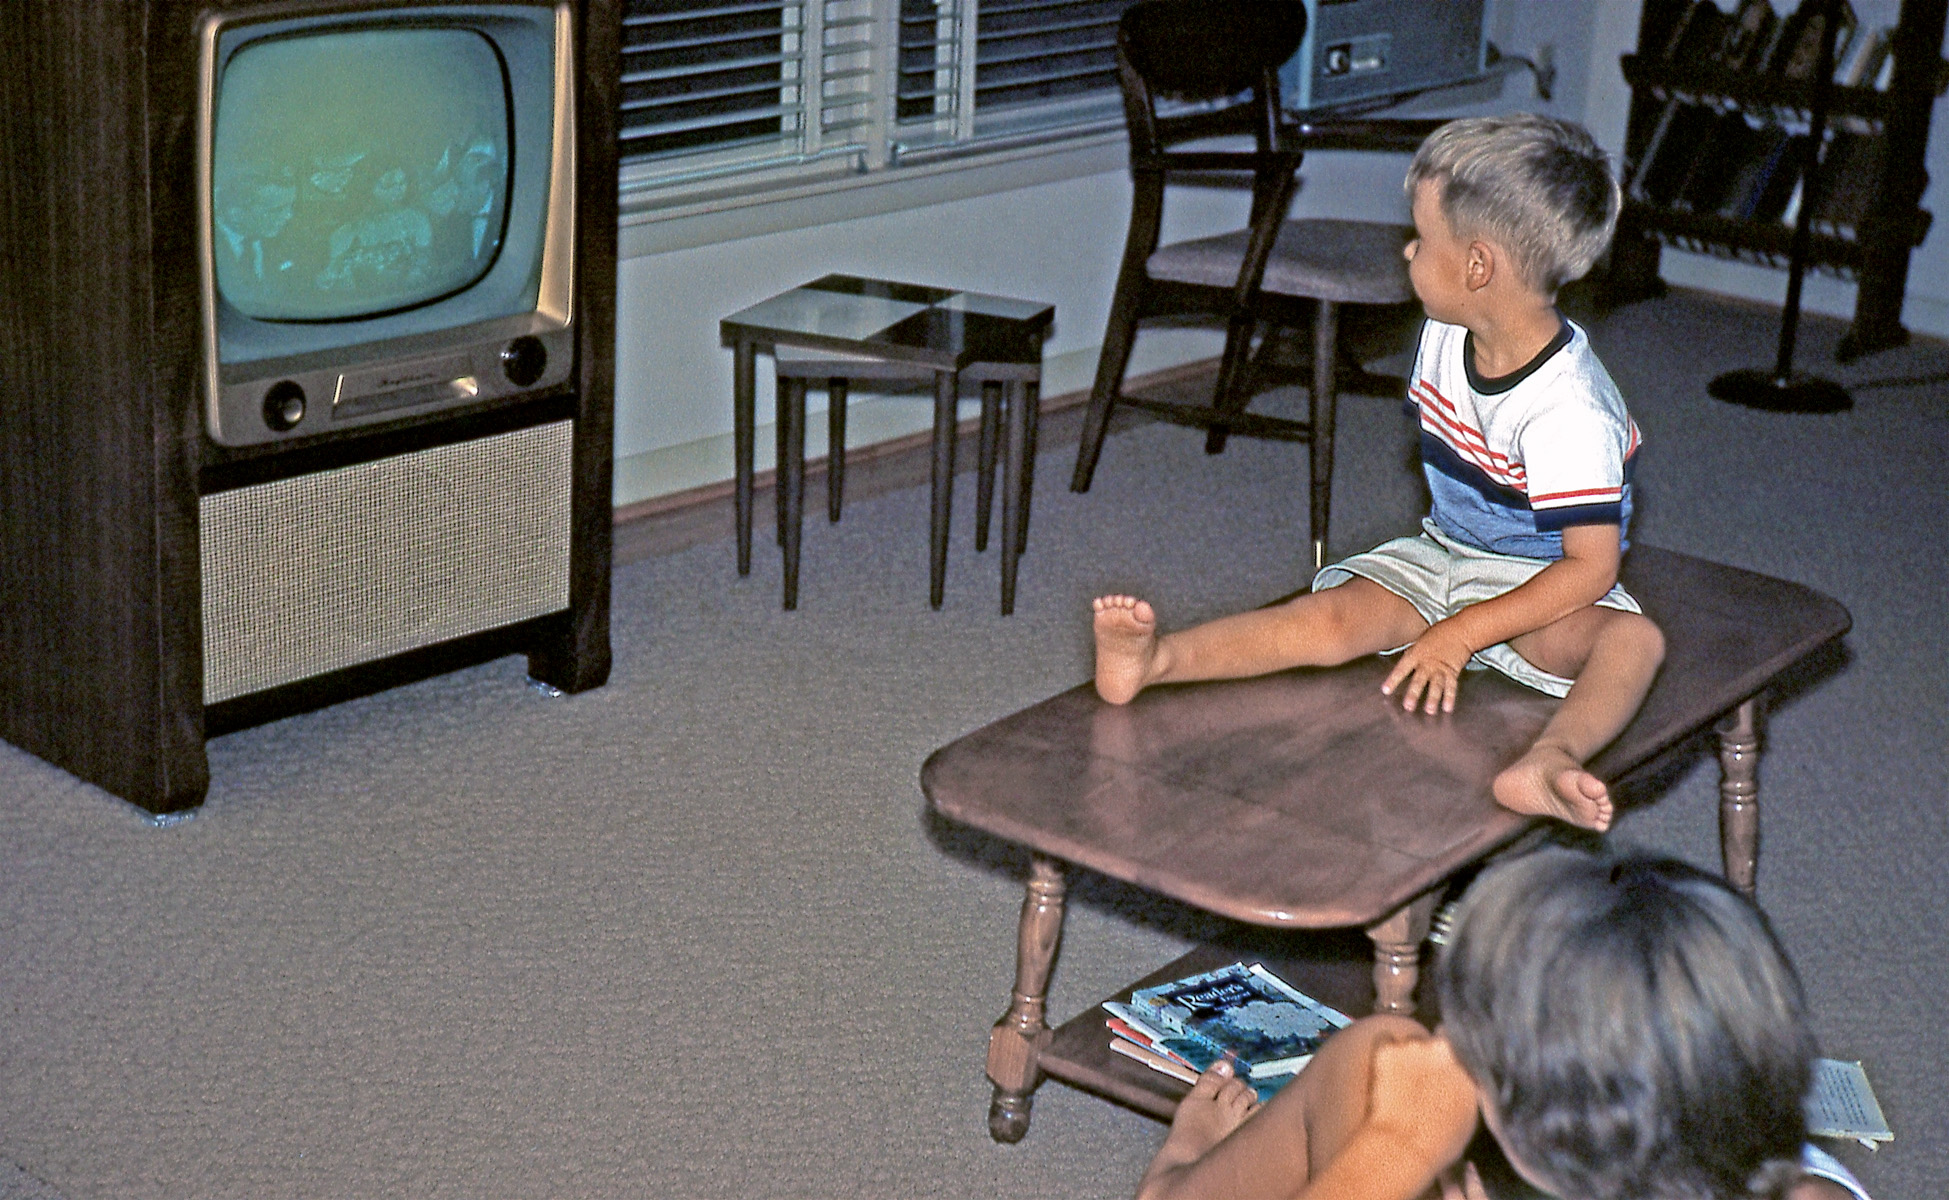 My sister and me watching TV; College Station, Texas, September, 1961. Sure wish I knew what it was we were watching. The ghostly image is tantalizing but probably not clear enough for a guess. View full size.